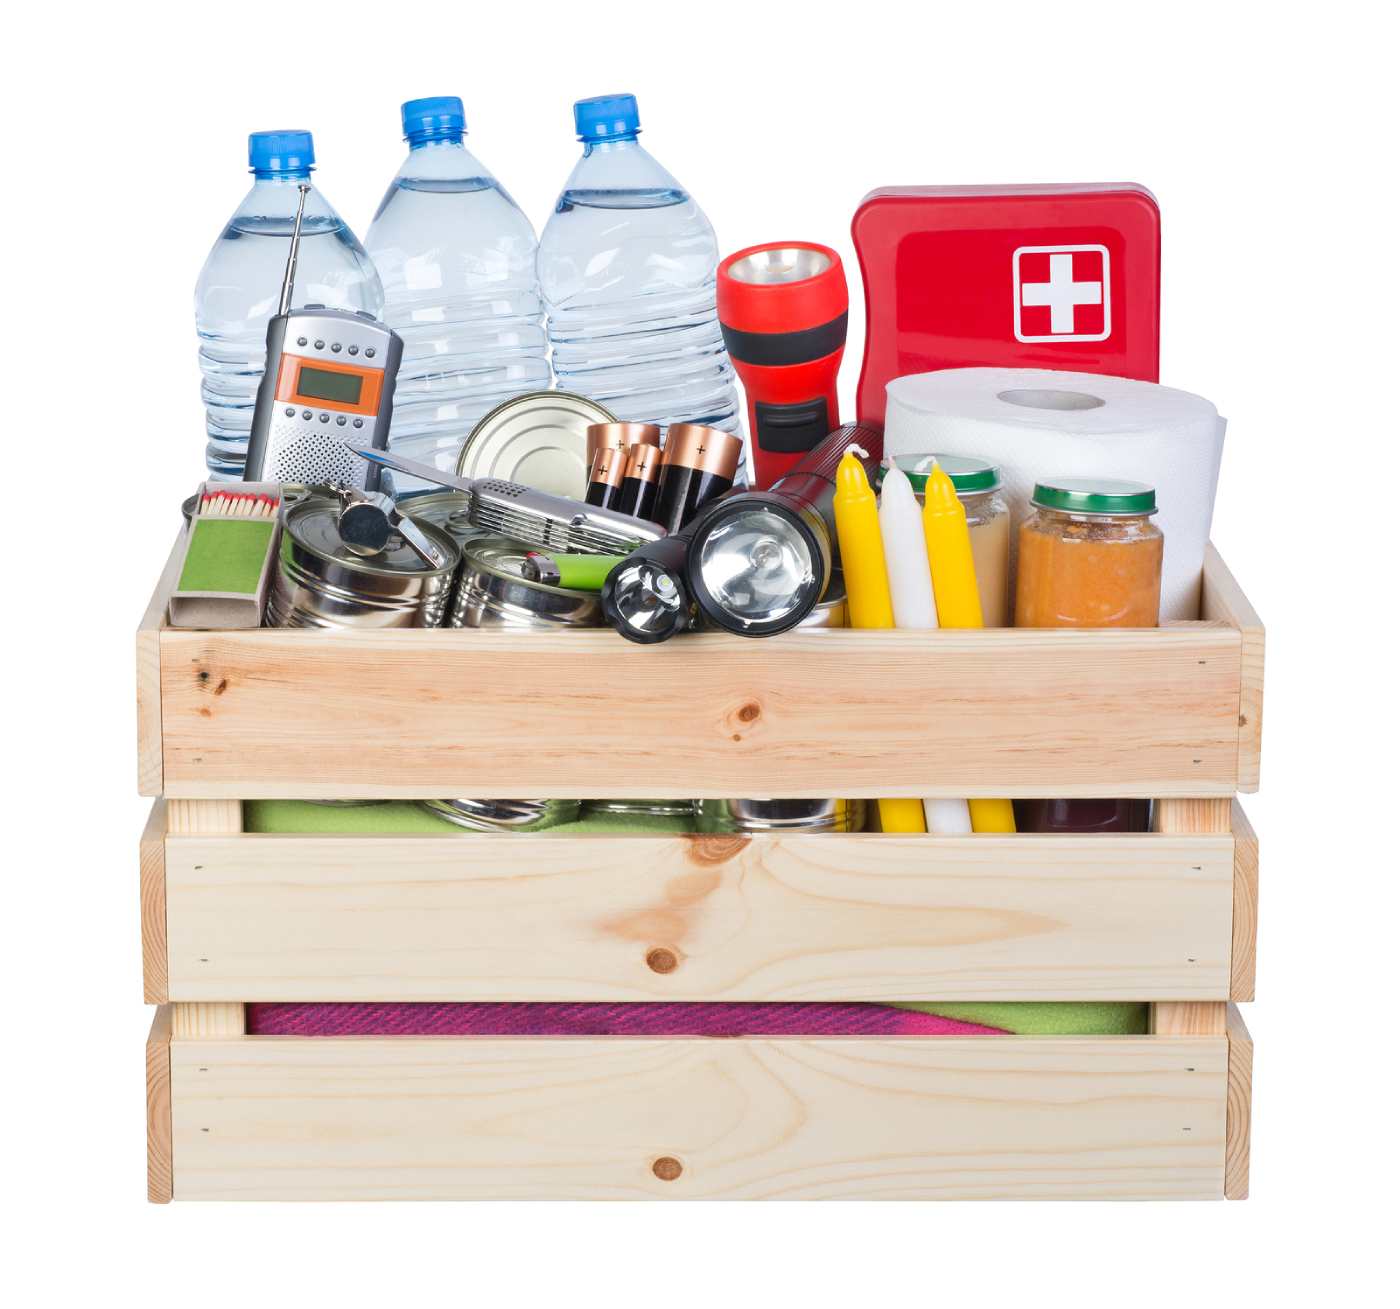 How to Prepare for Disaster with an Emergency Survival Kit for Your Home